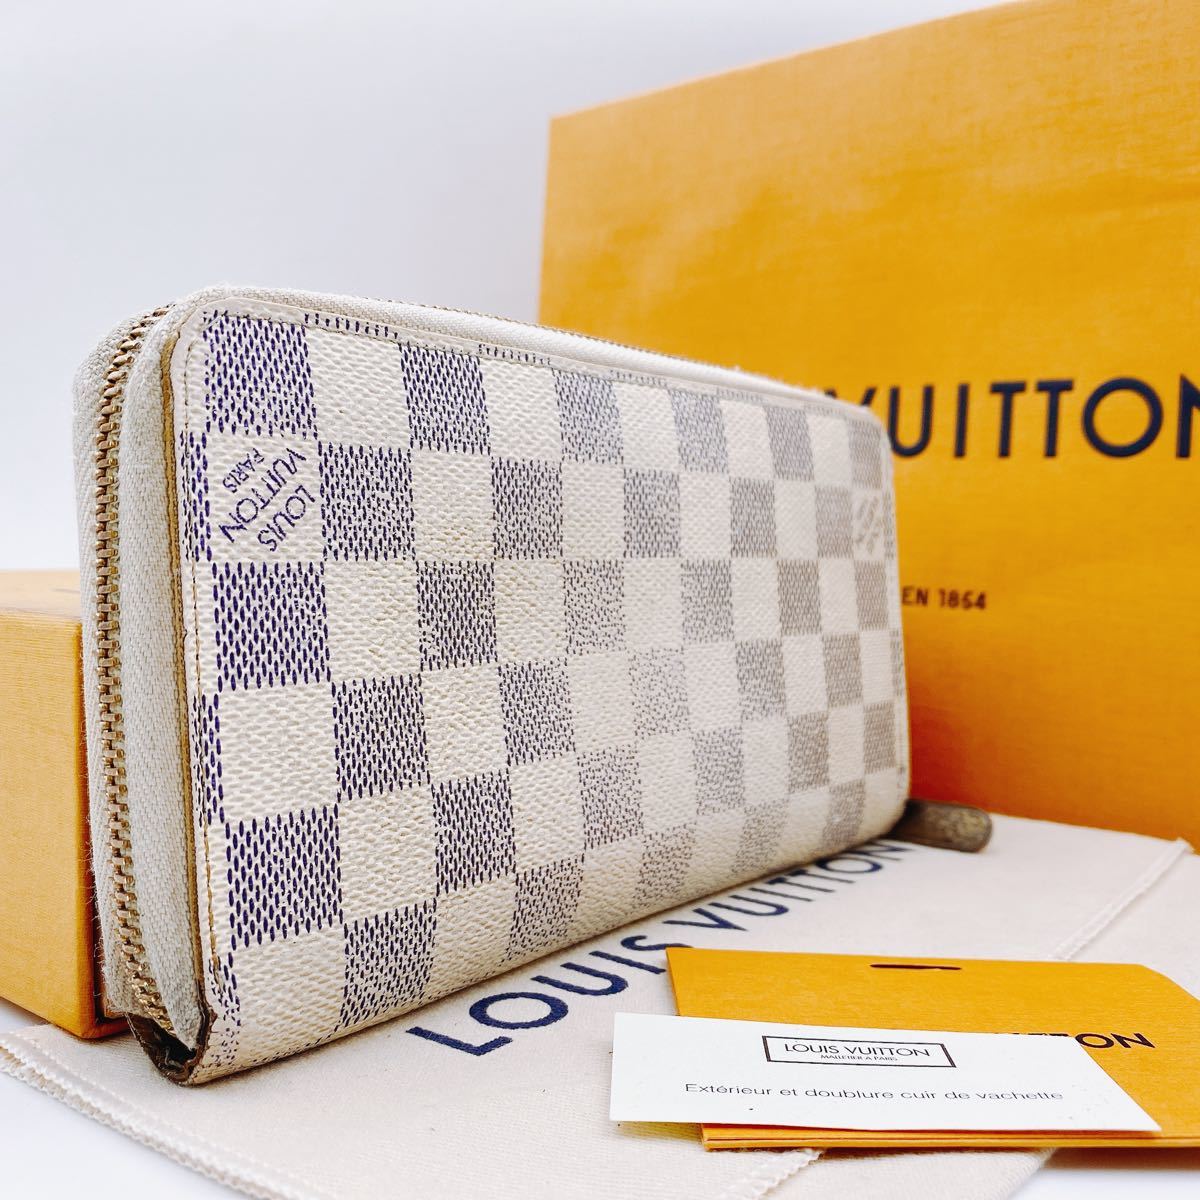 A566【正規品】LOUIS VUITTON ルイヴィトン ダミエ アズール ジッピー